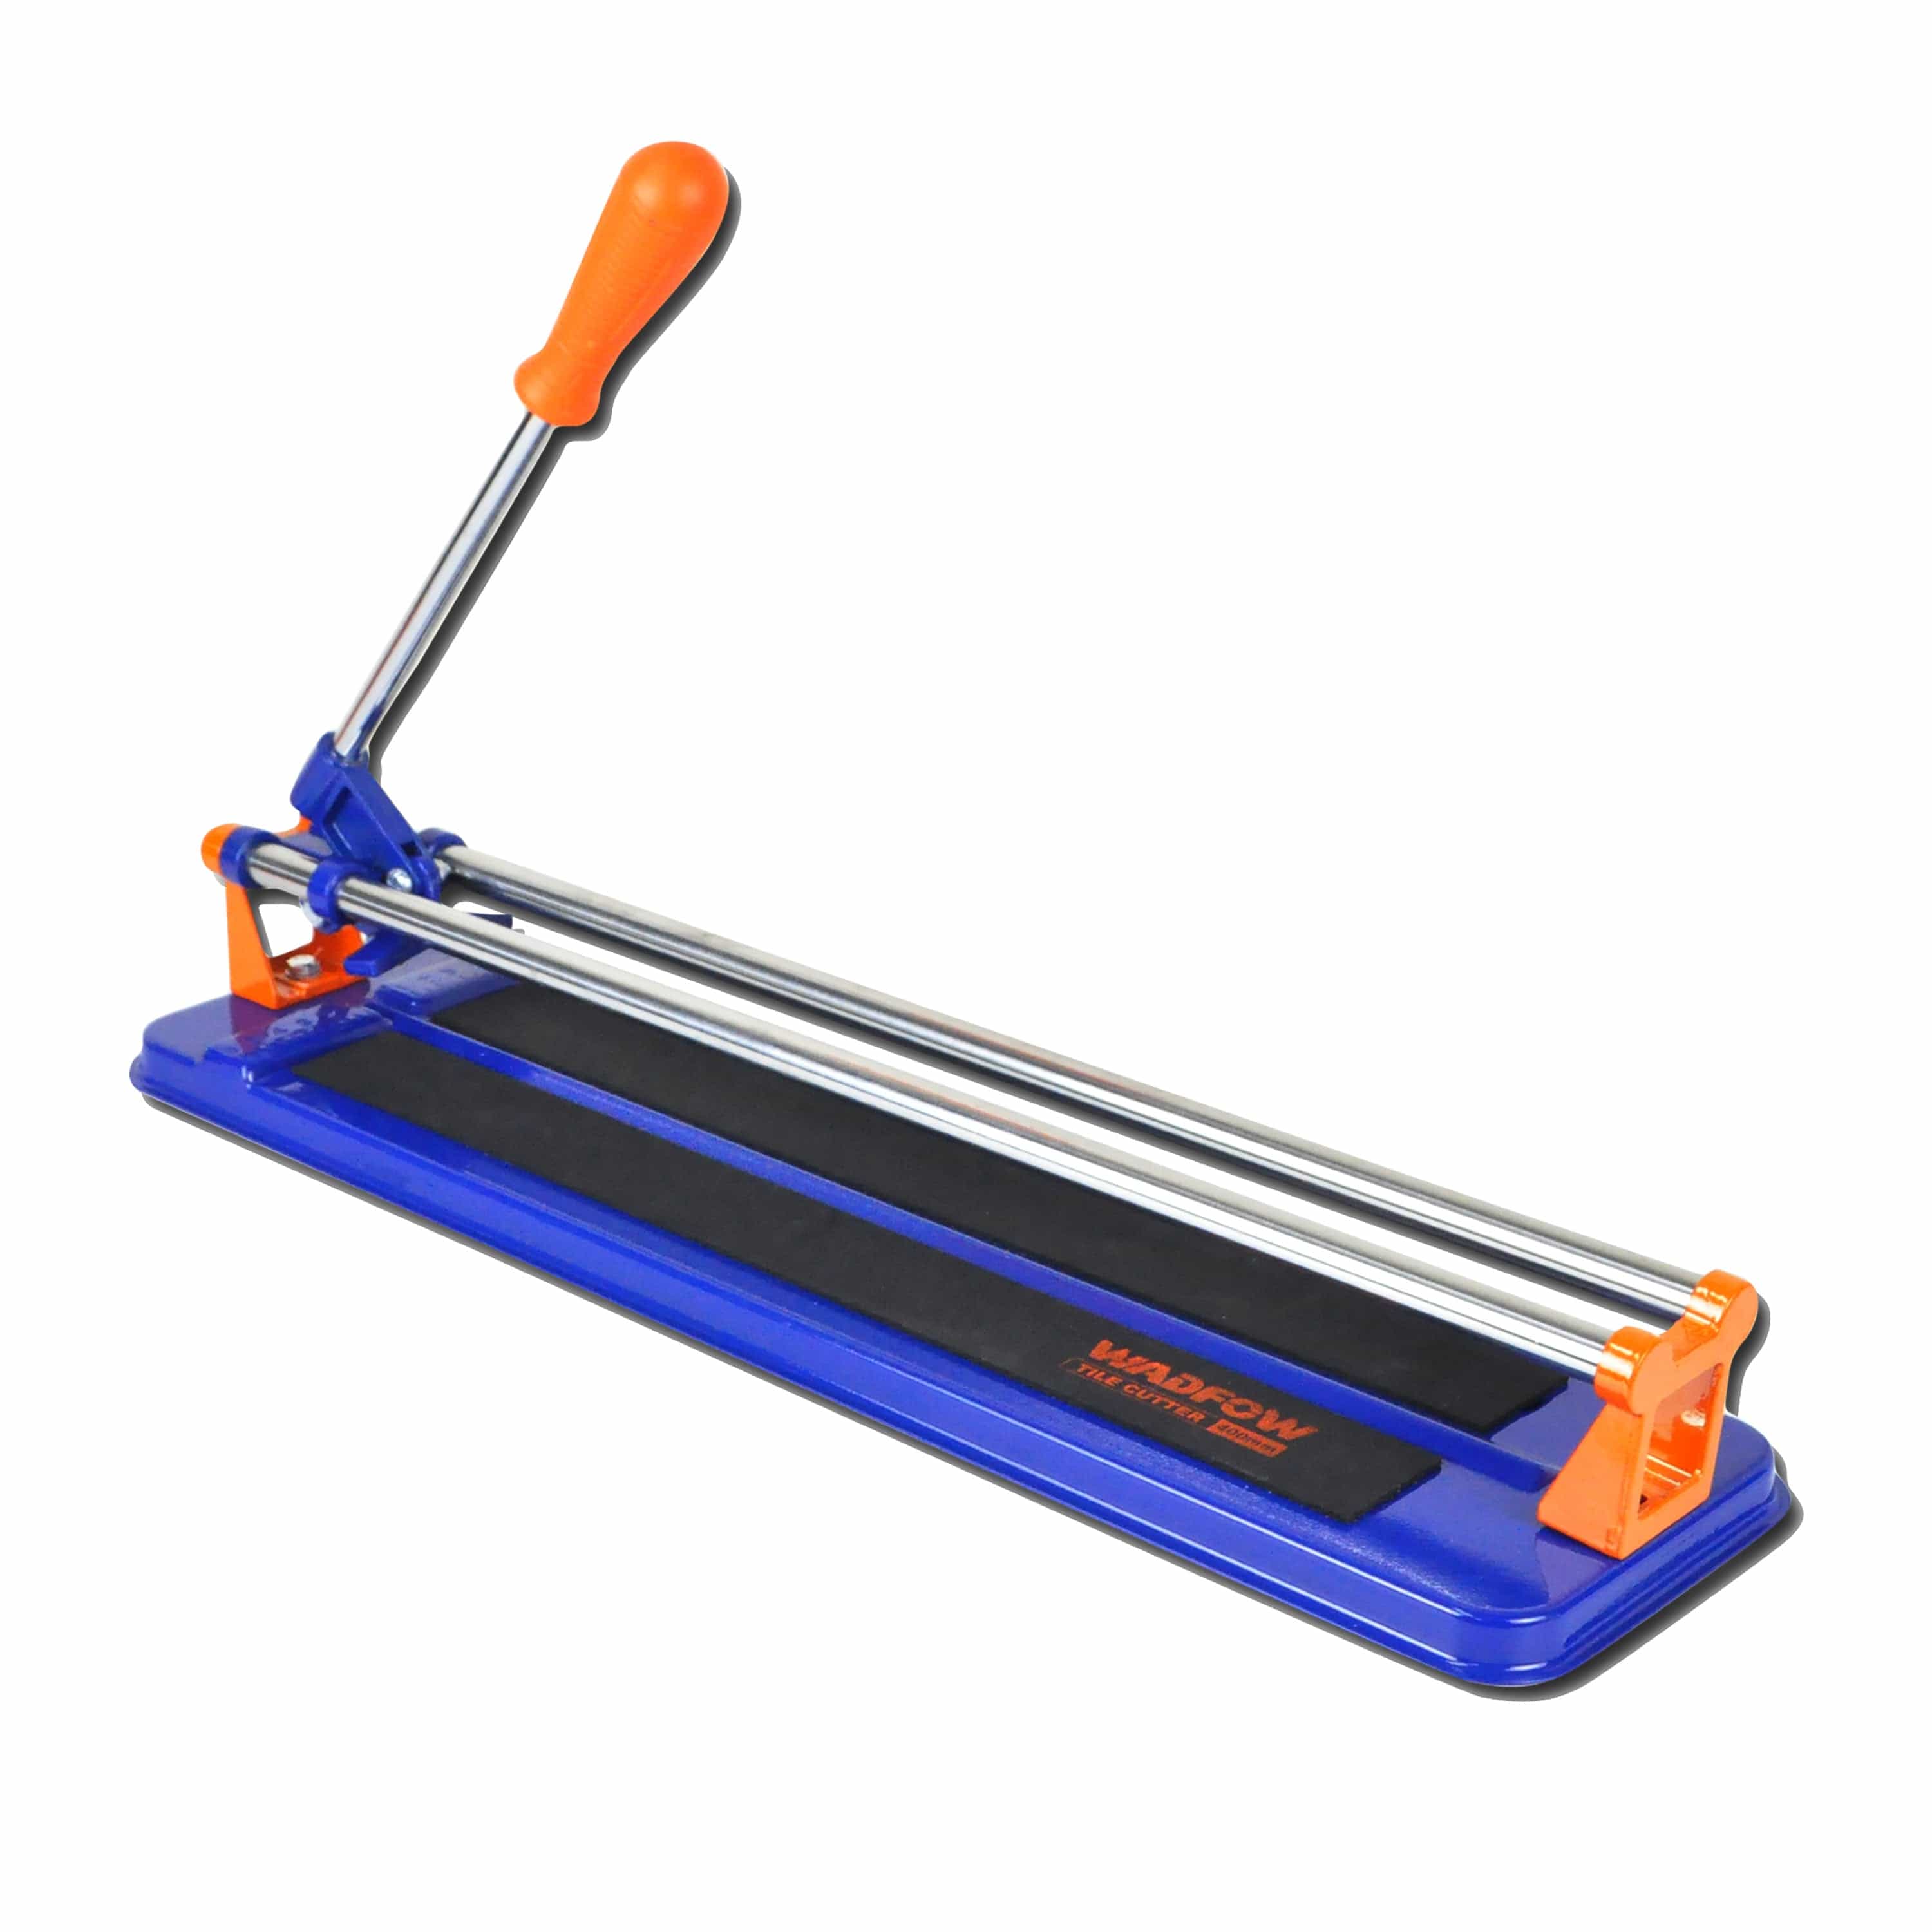 Buy Wadfow 600mm Tile Cutter Online in Accra, Ghana | Supply Master Marble & Tile Cutter Buy Tools hardware Building materials